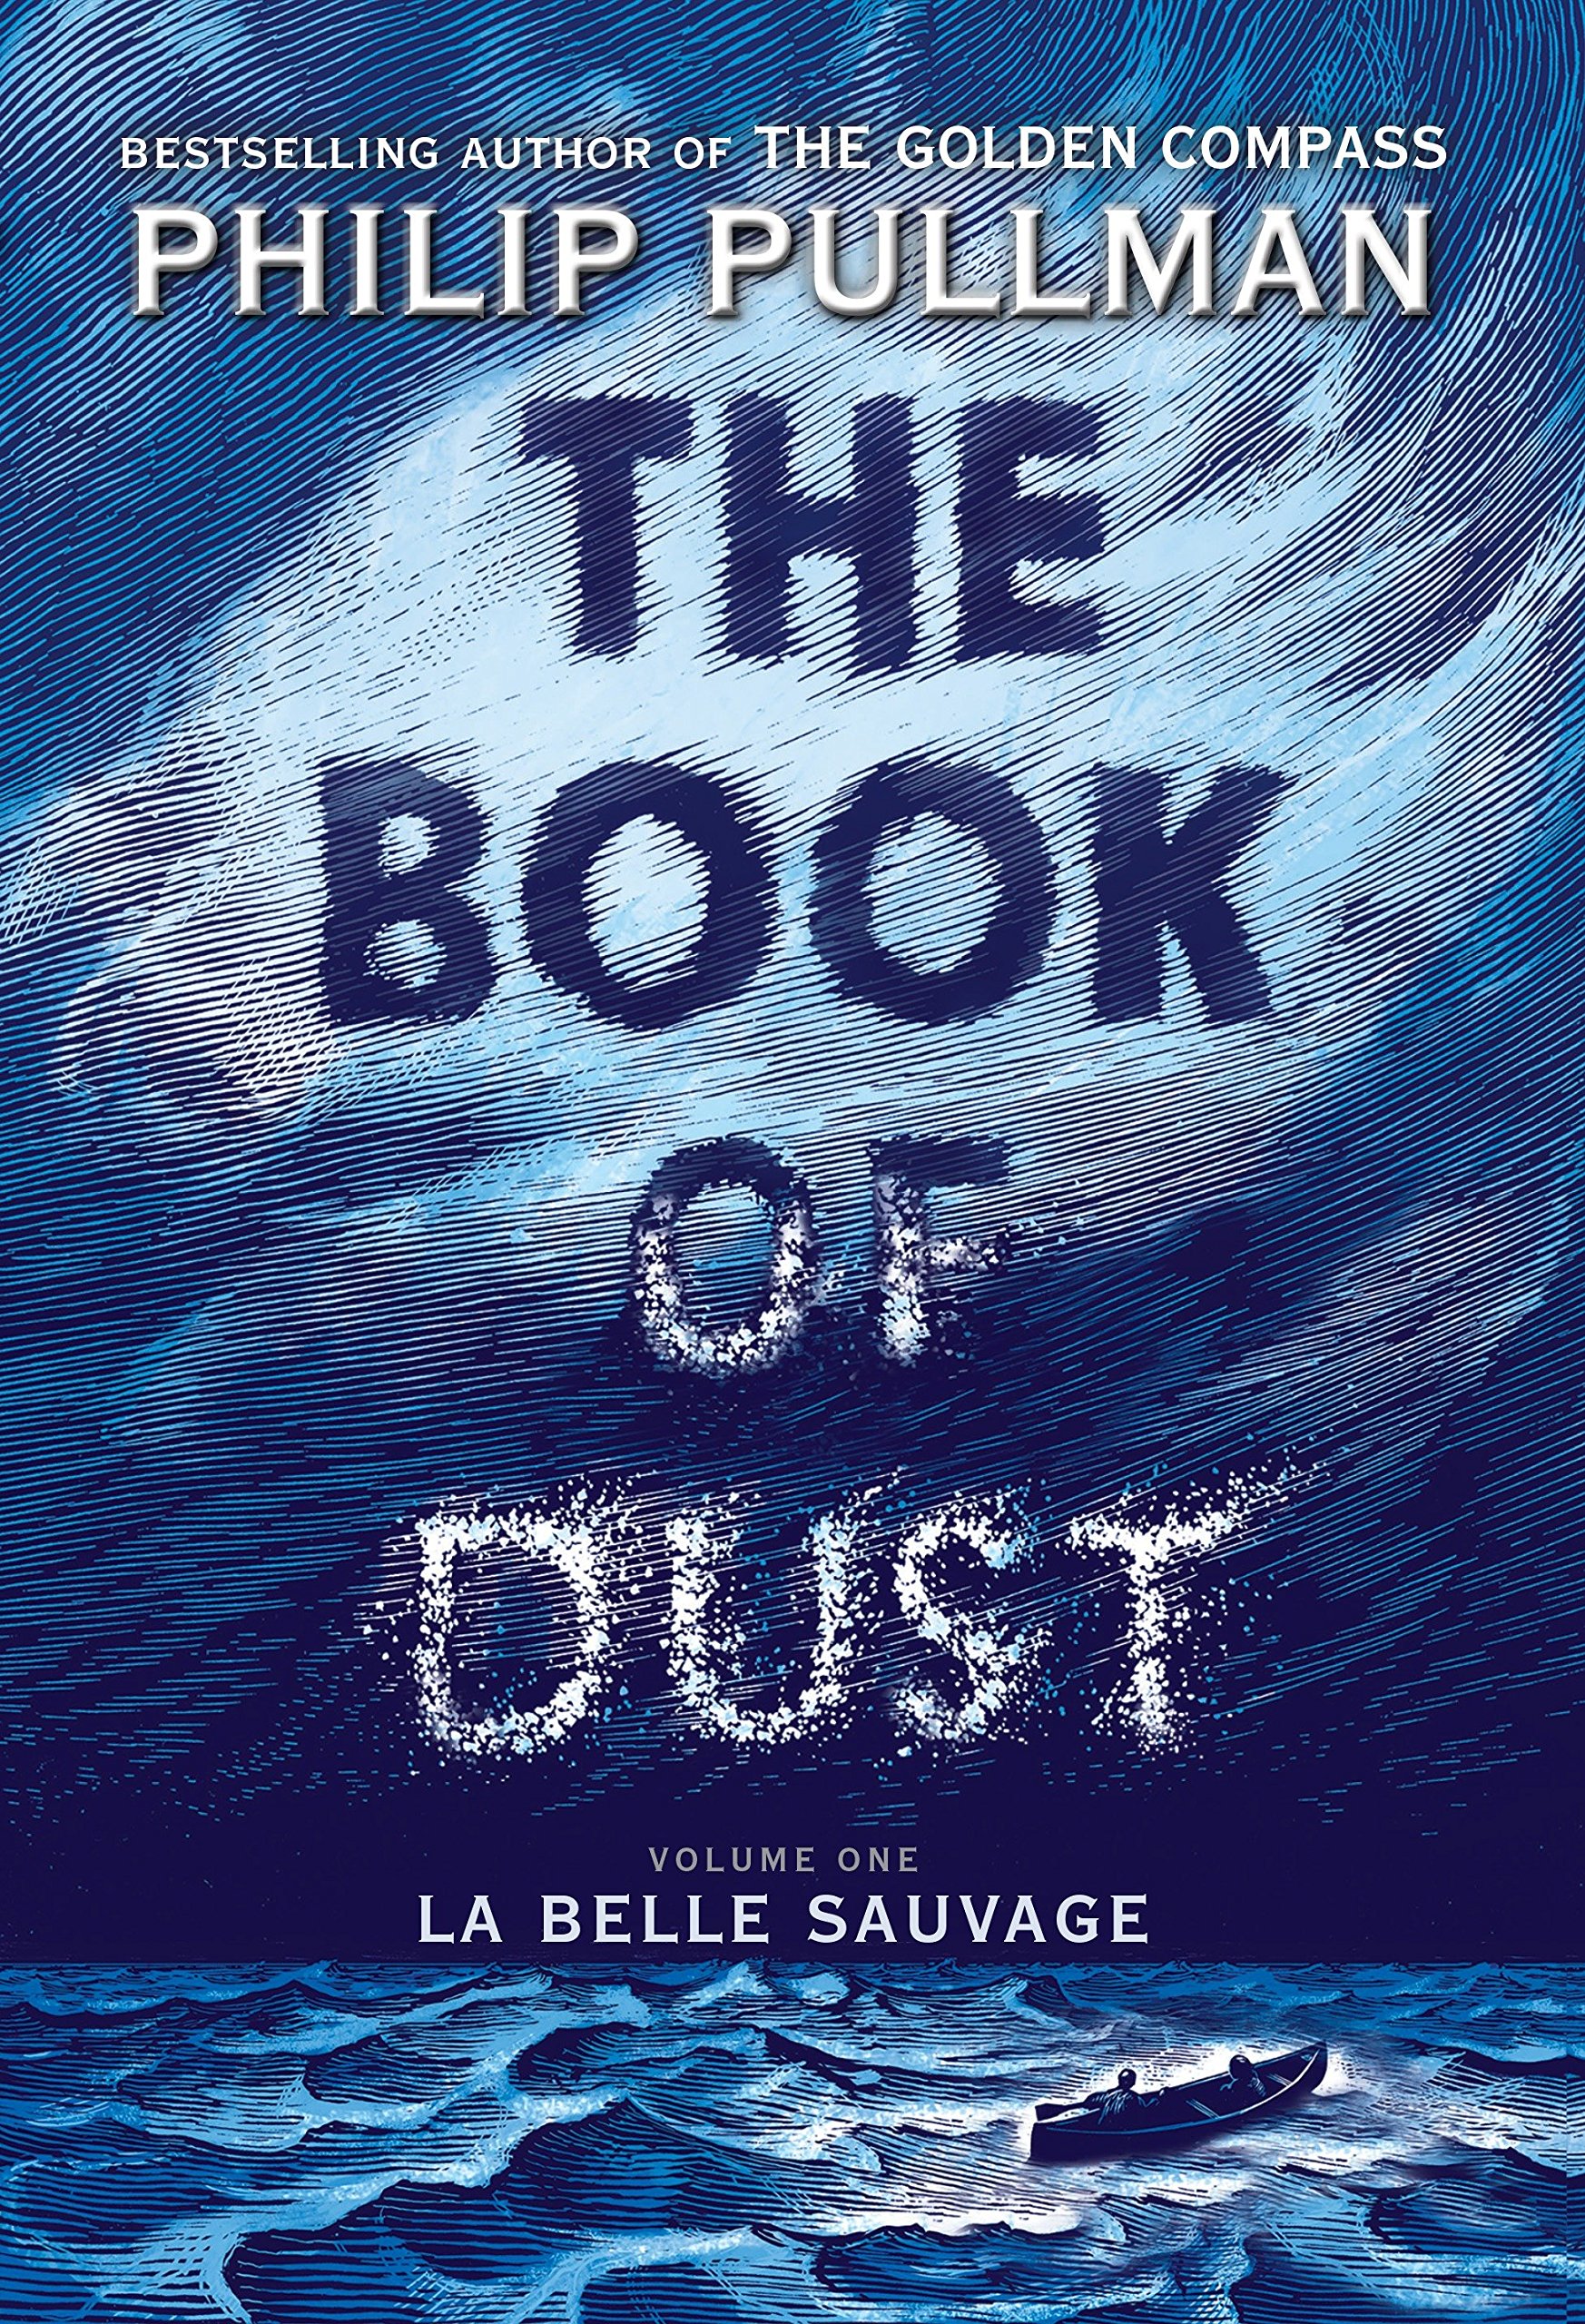 Cover Image for La Belle Sauvage